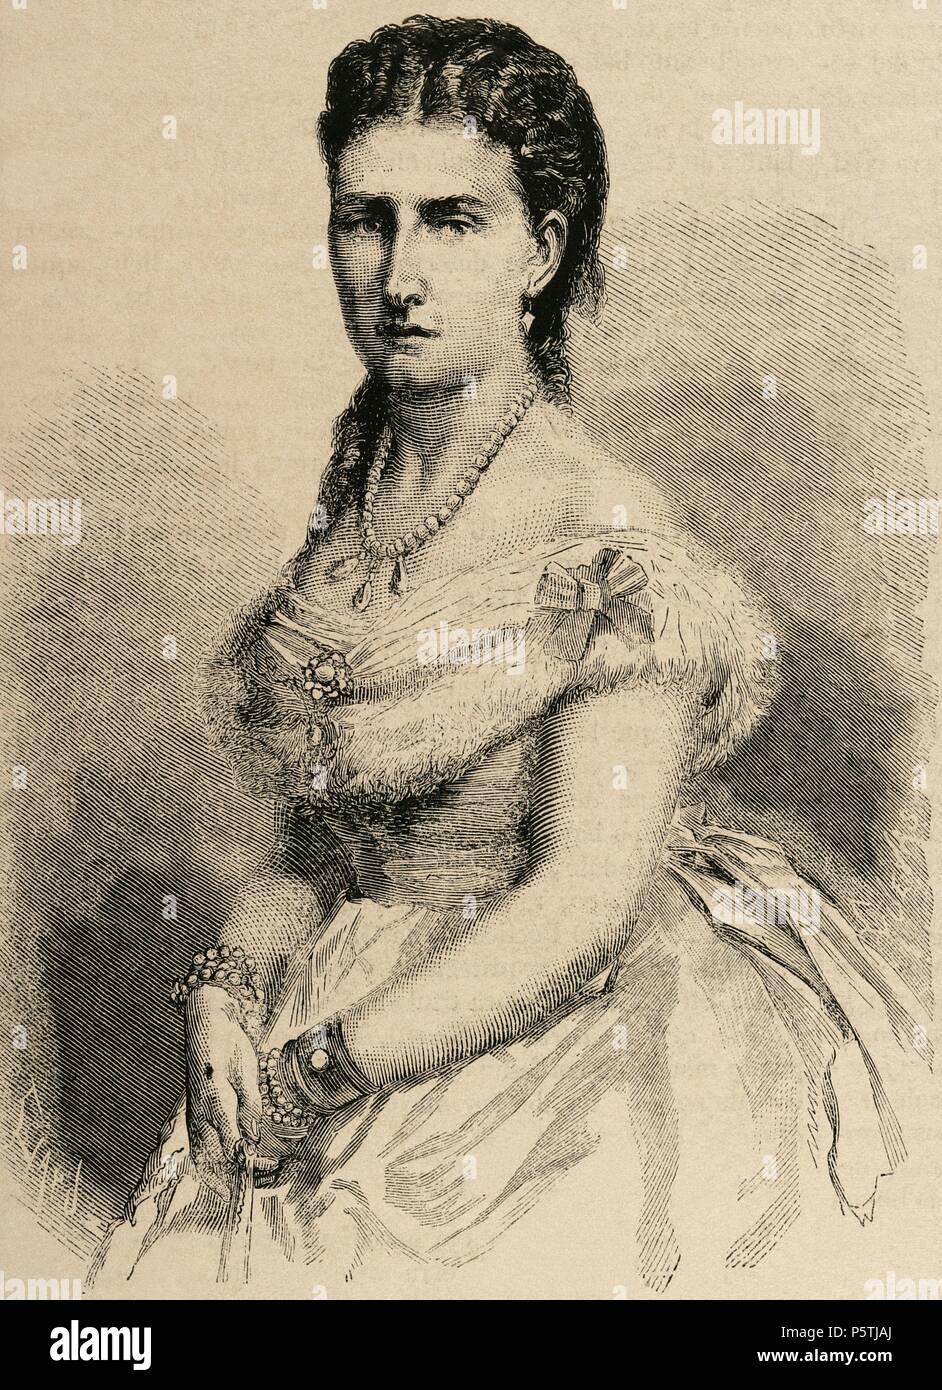 Infanta Antonia of Portugal or Braganza. (1845-1913). Was a Portuguese infanta (princess) of the House of Braganza-Saxe-Coburg and Gotha, daughter of Queen Maria II of Portugal and her King consort Ferdinand II of Portugal. She married Leopold, Prince of Hohenzollern-Sigmaringen. Engraving by Tomas Carlos Capus. The Spanish and American illustration, 1870. Stock Photo